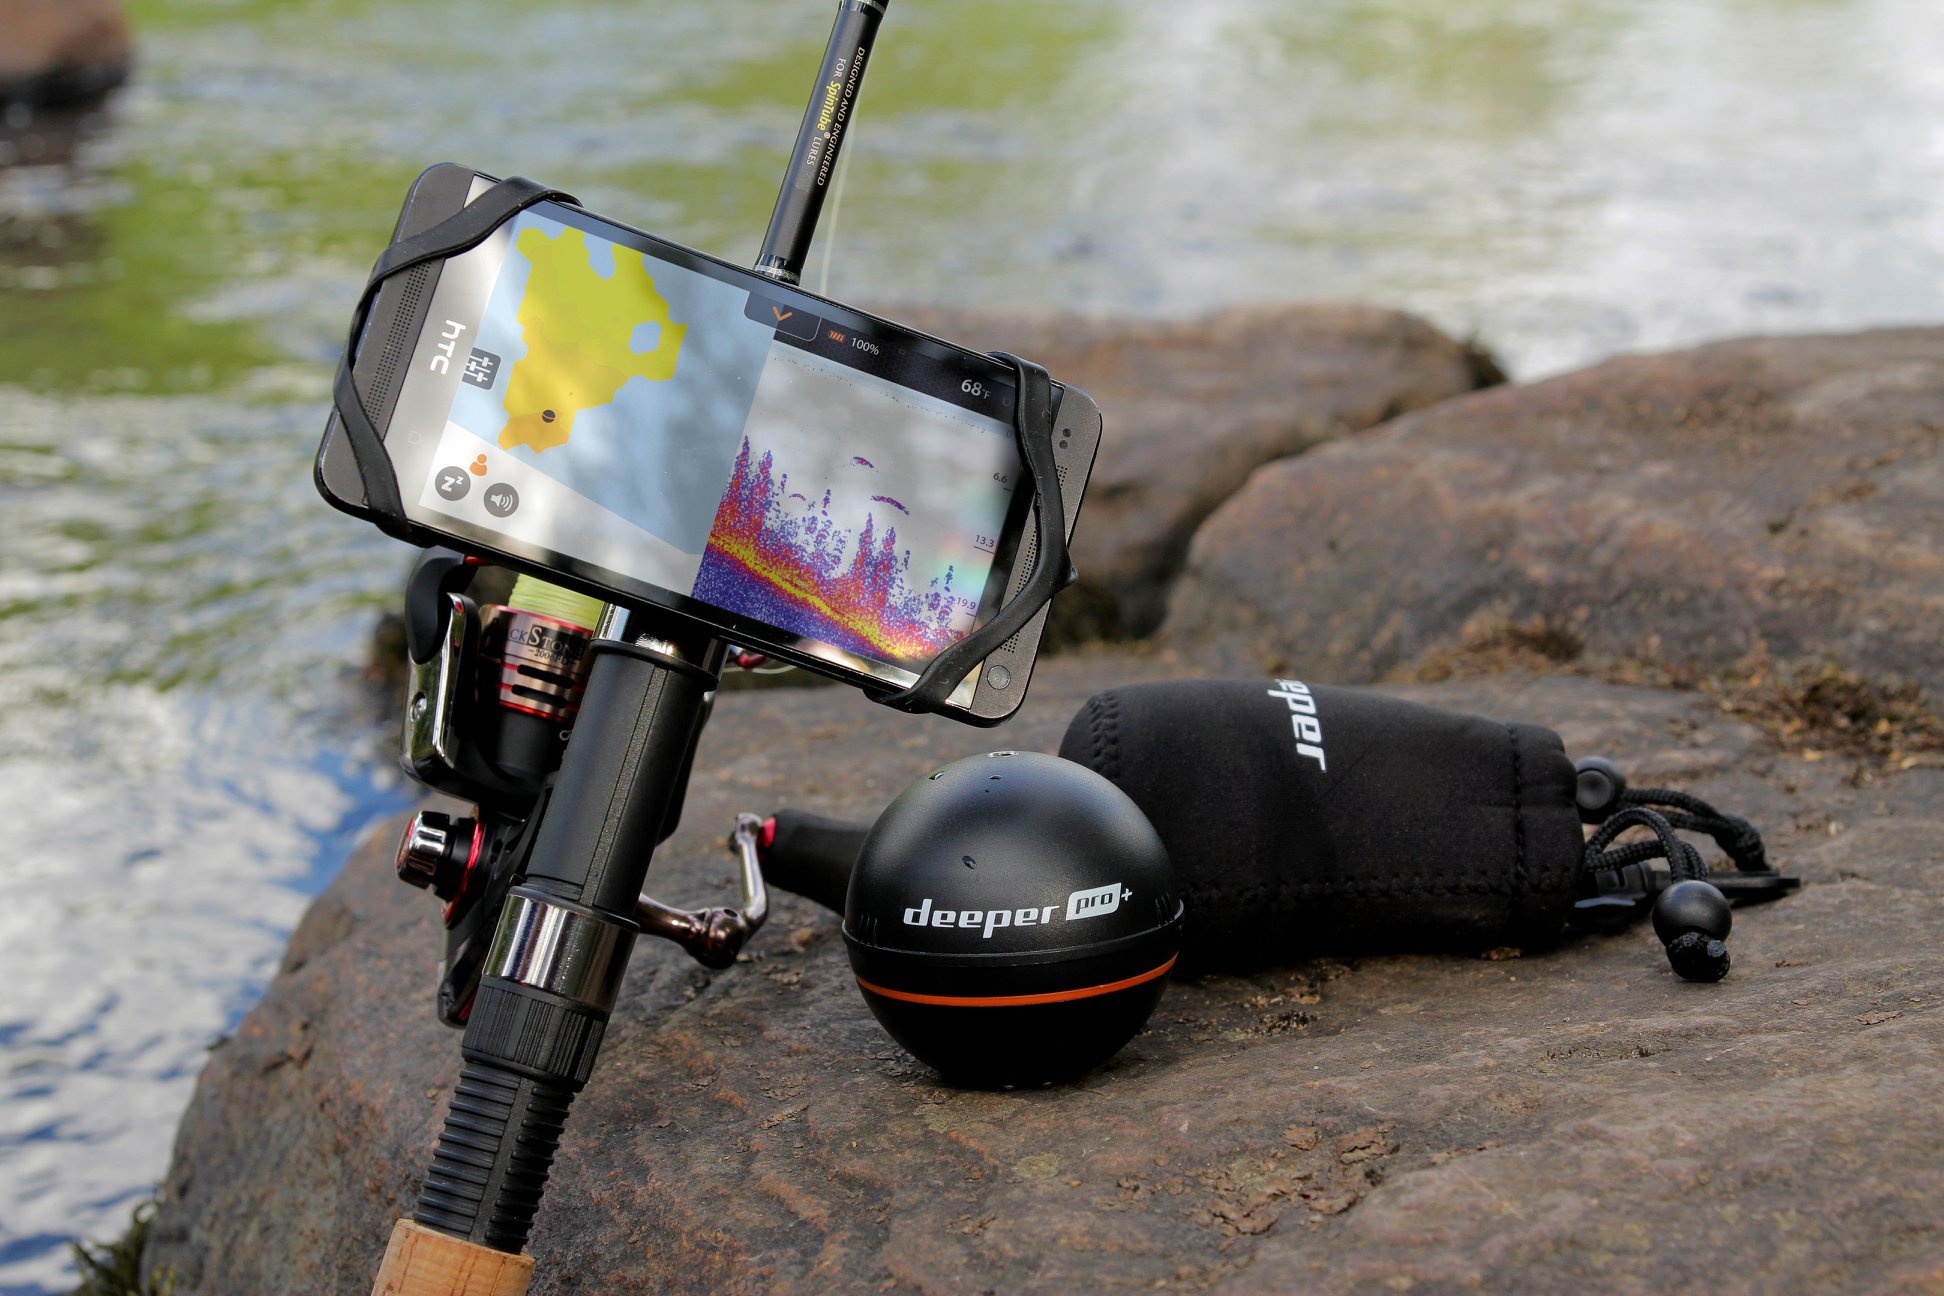 Deeper PRO+ Smart Fish Finder with GPS and Wi-Fi | Deeper